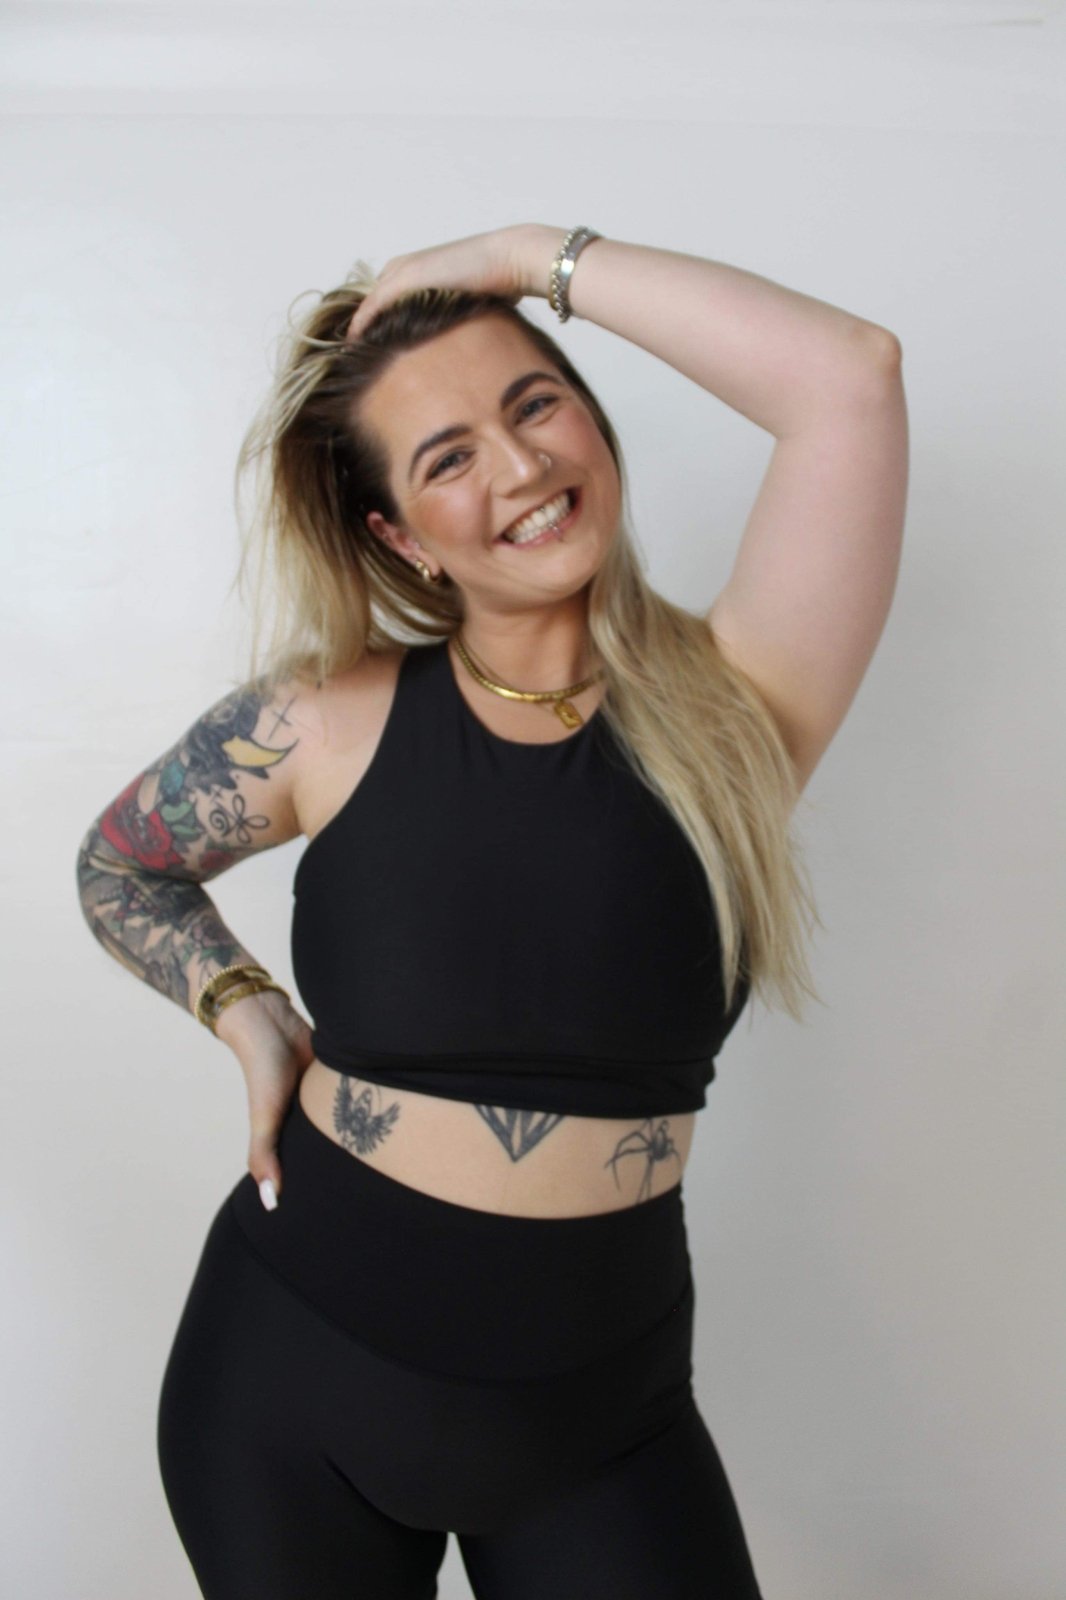 Owner of Vocus Vit, Sarah-Jane, wearing black sports bra and leggings with her hand holding her hair back from her face. Vocus vit is a sustainable women's activewear brand that uses recycled materials and ethical manufacturing. Based in Northern Ireland. Shipping worldwide.Sizes XS (8) TO XXL (18).